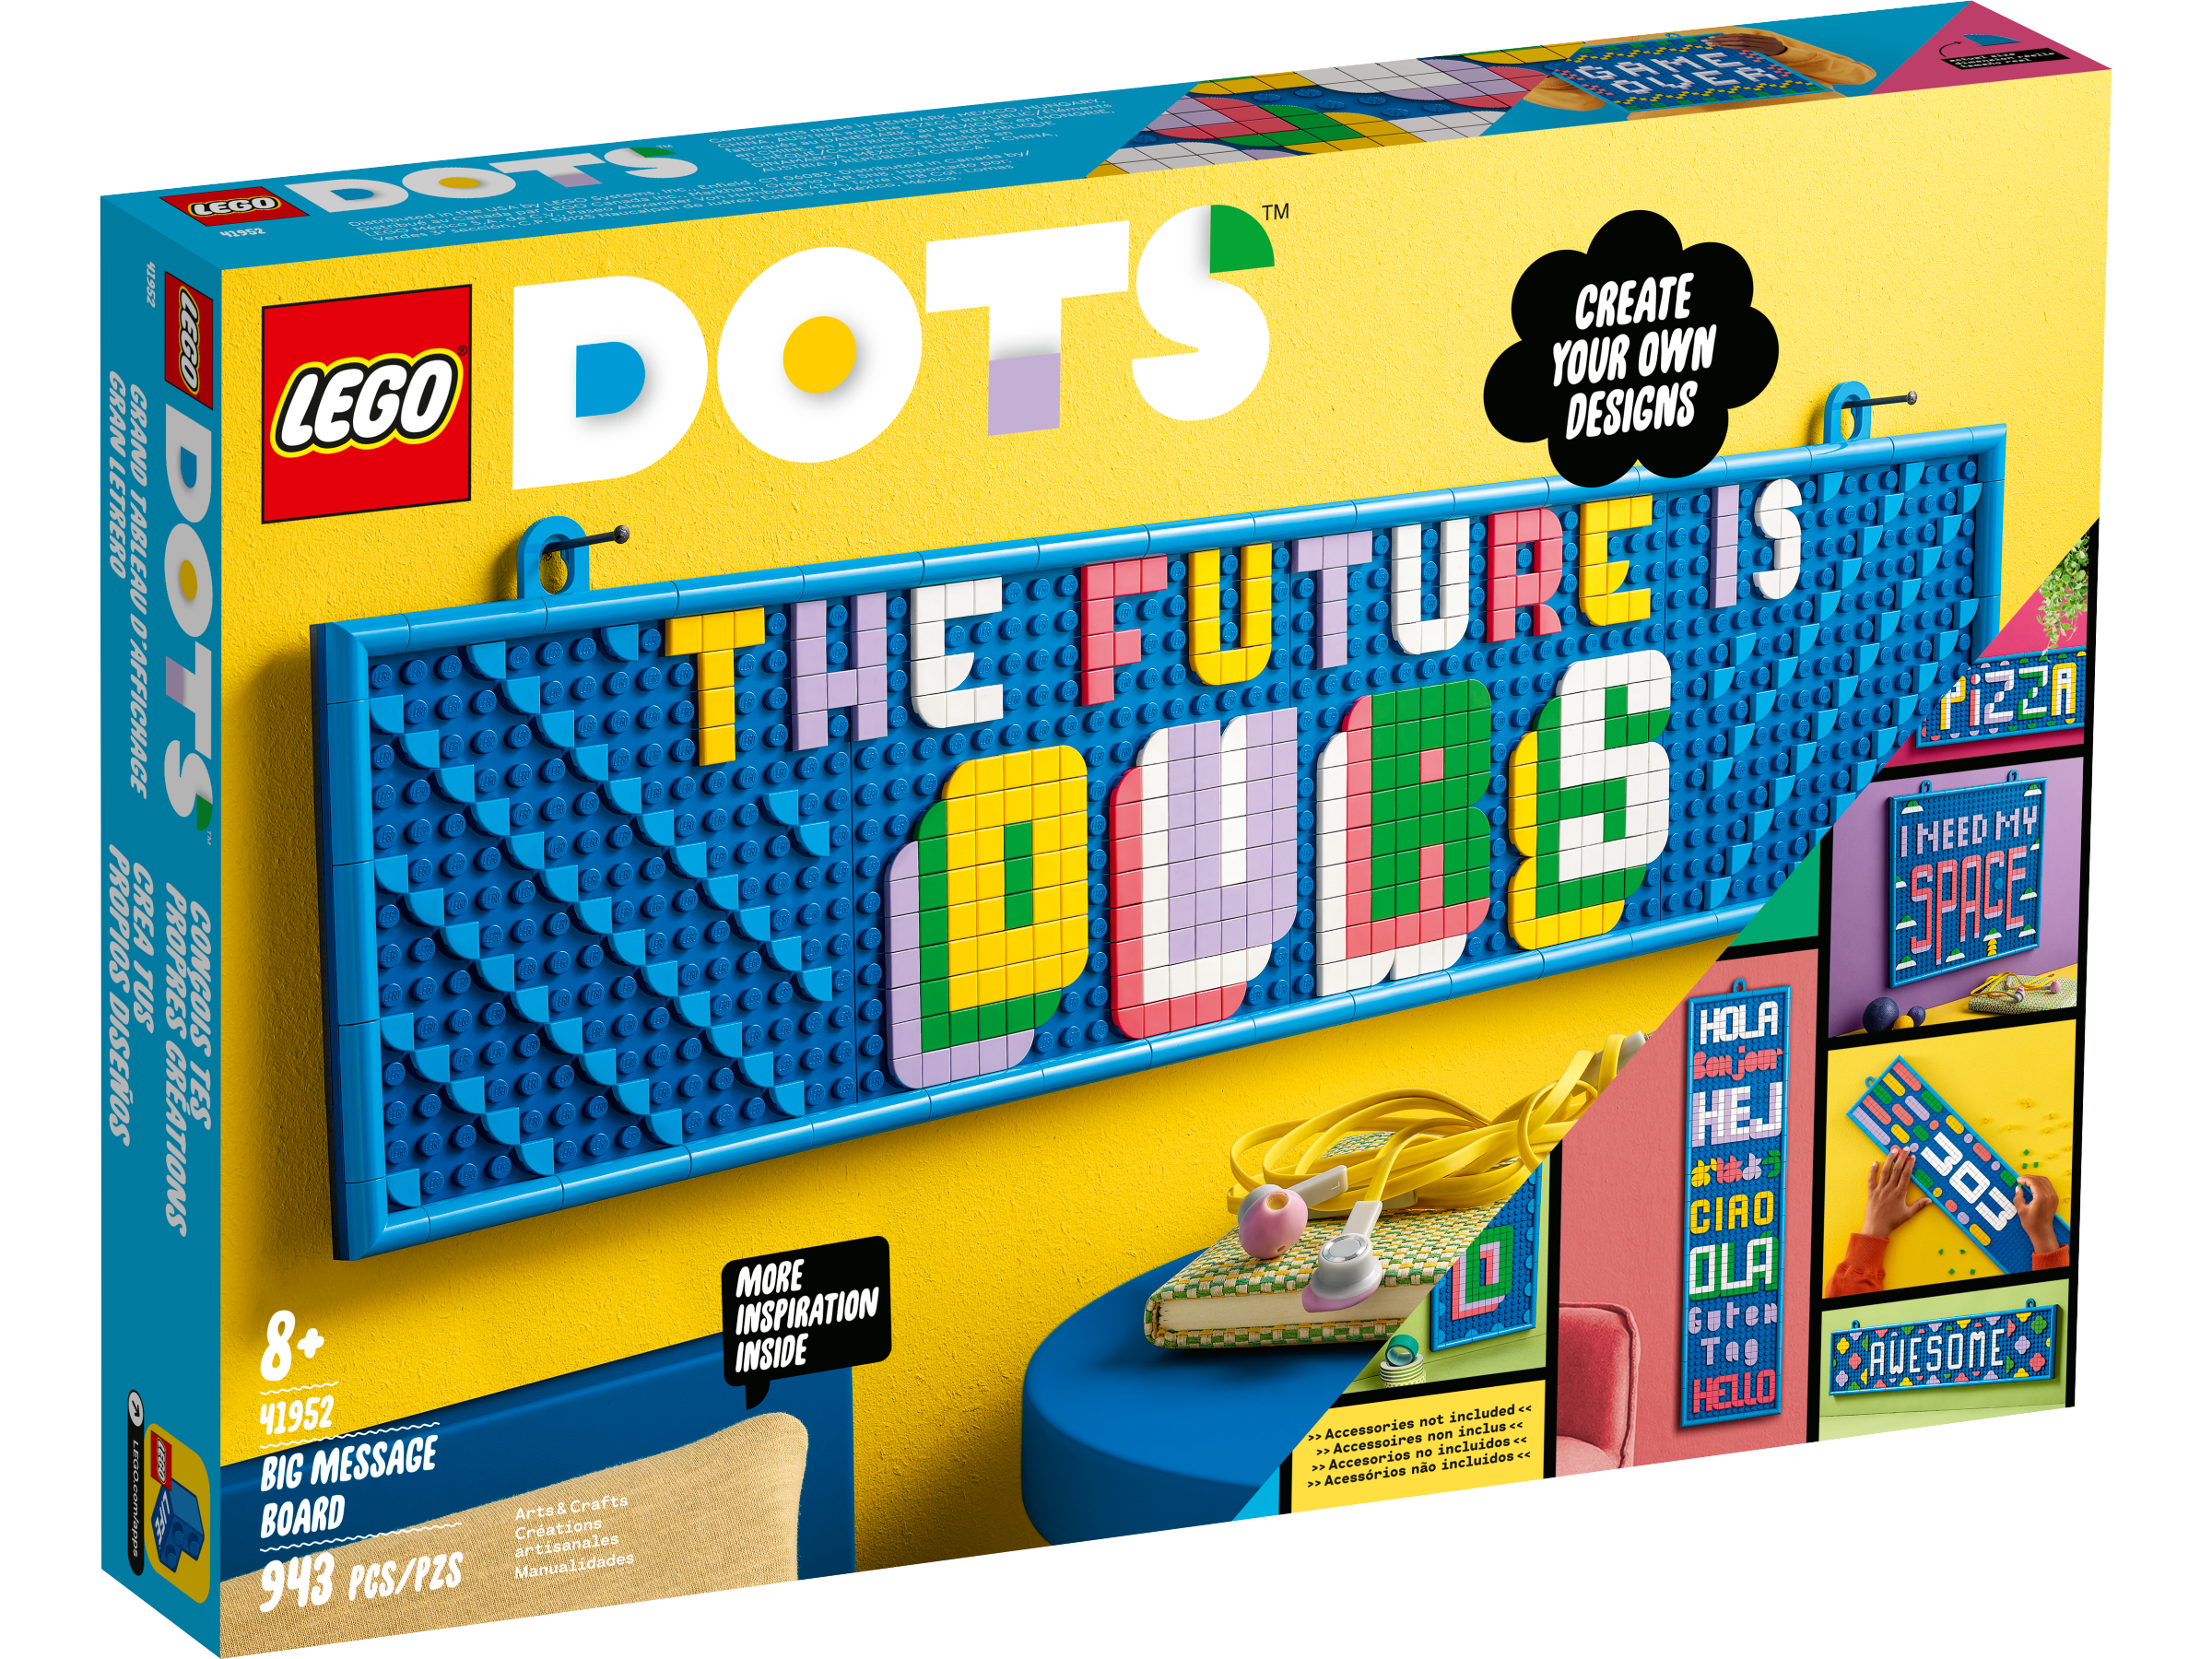 LEGO Dots Message Boards: Write Words with Bricks